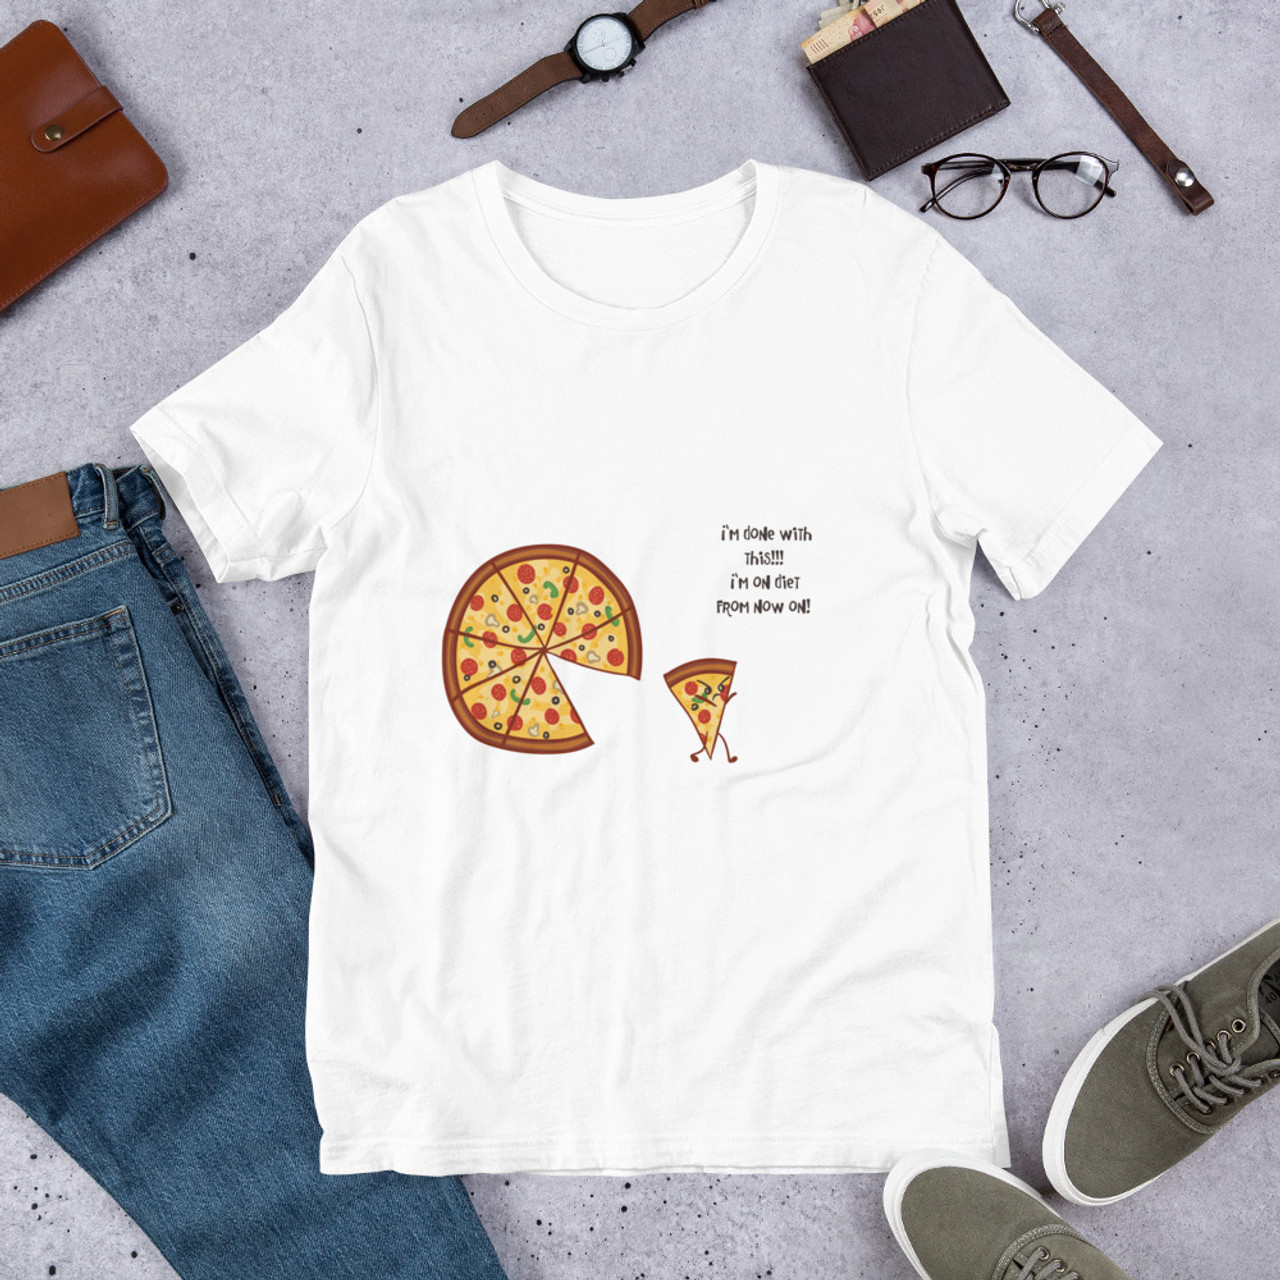 White T-Shirt - Bella + Canvas 3001 Angry Pizza